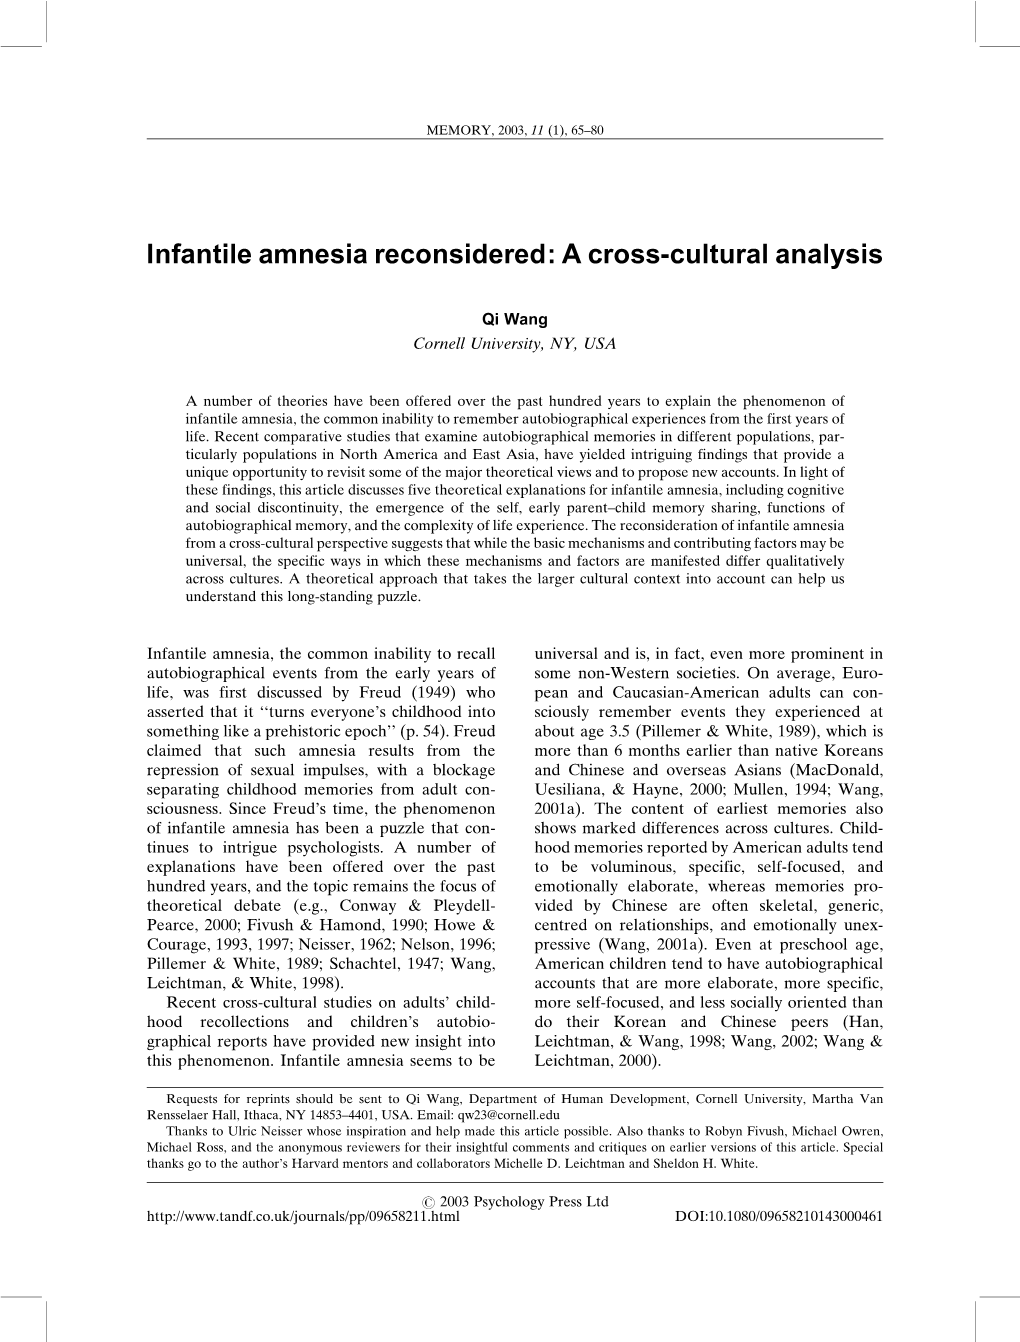 Infantile Amnesia Reconsidered: a Cross-Cultural Analysis